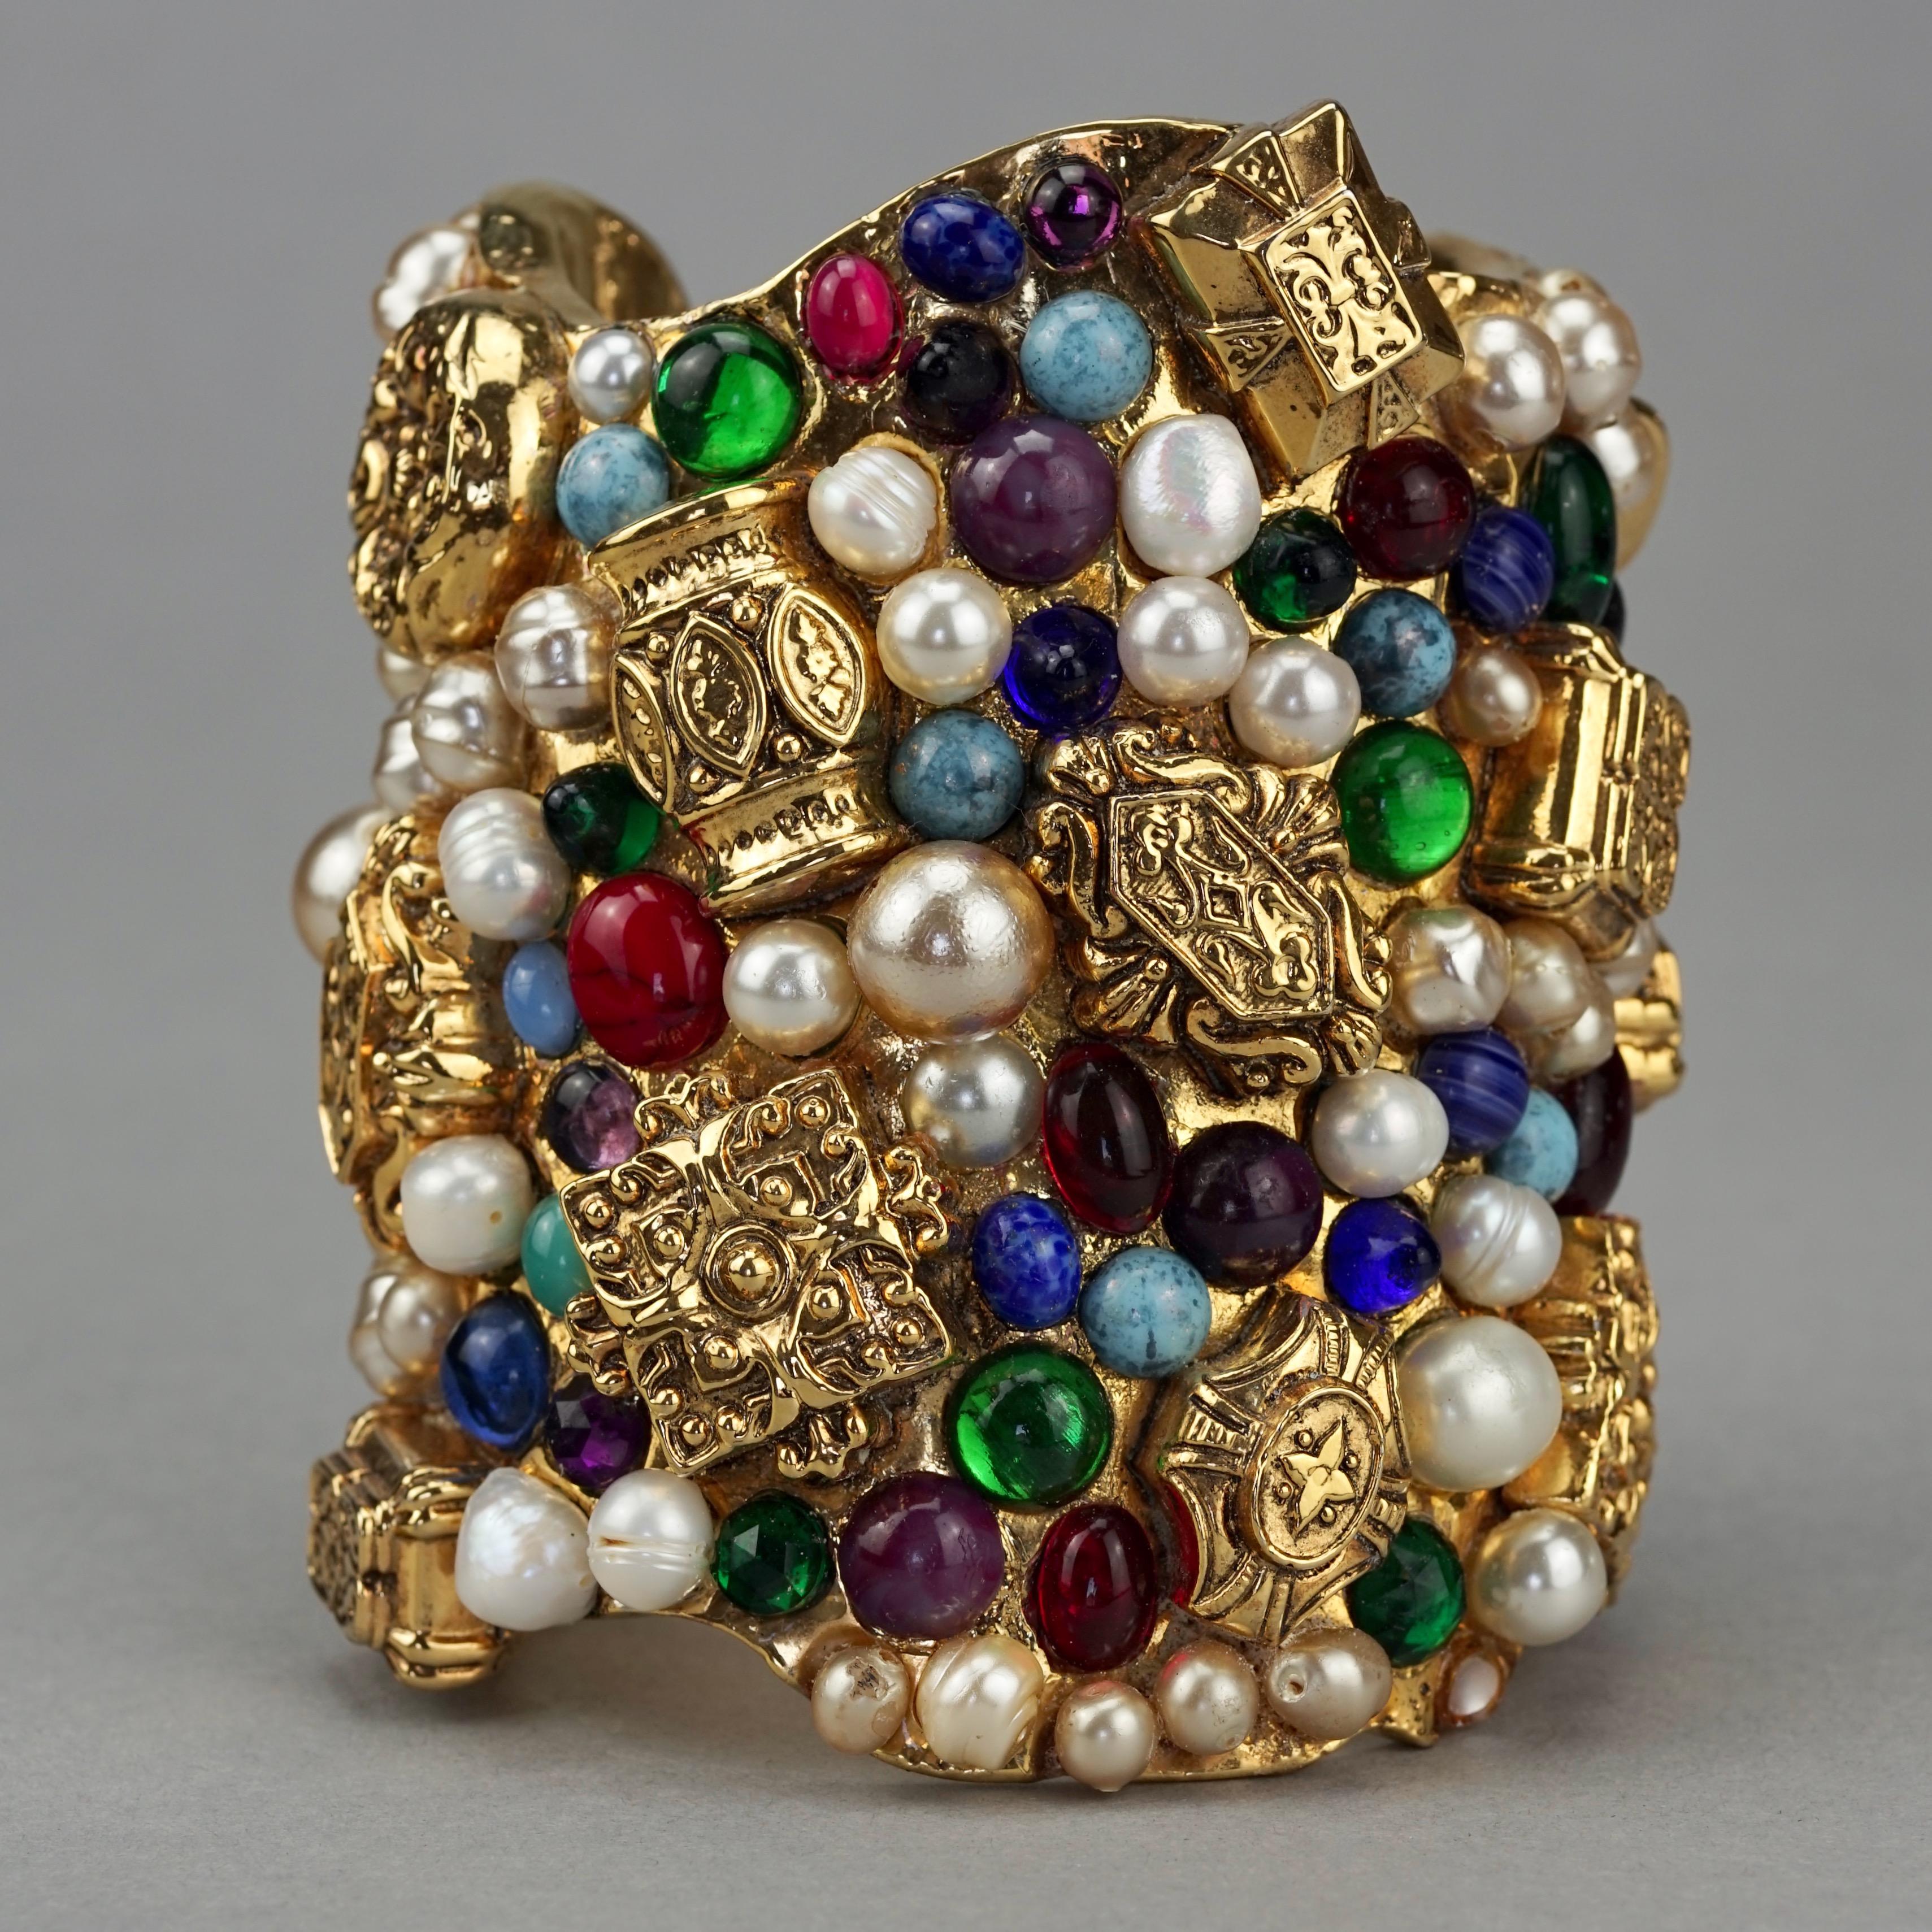 Vintage French Opulent Jewelled Cabochon Pearls Wide Cuff Bracelet In Good Condition For Sale In Kingersheim, Alsace